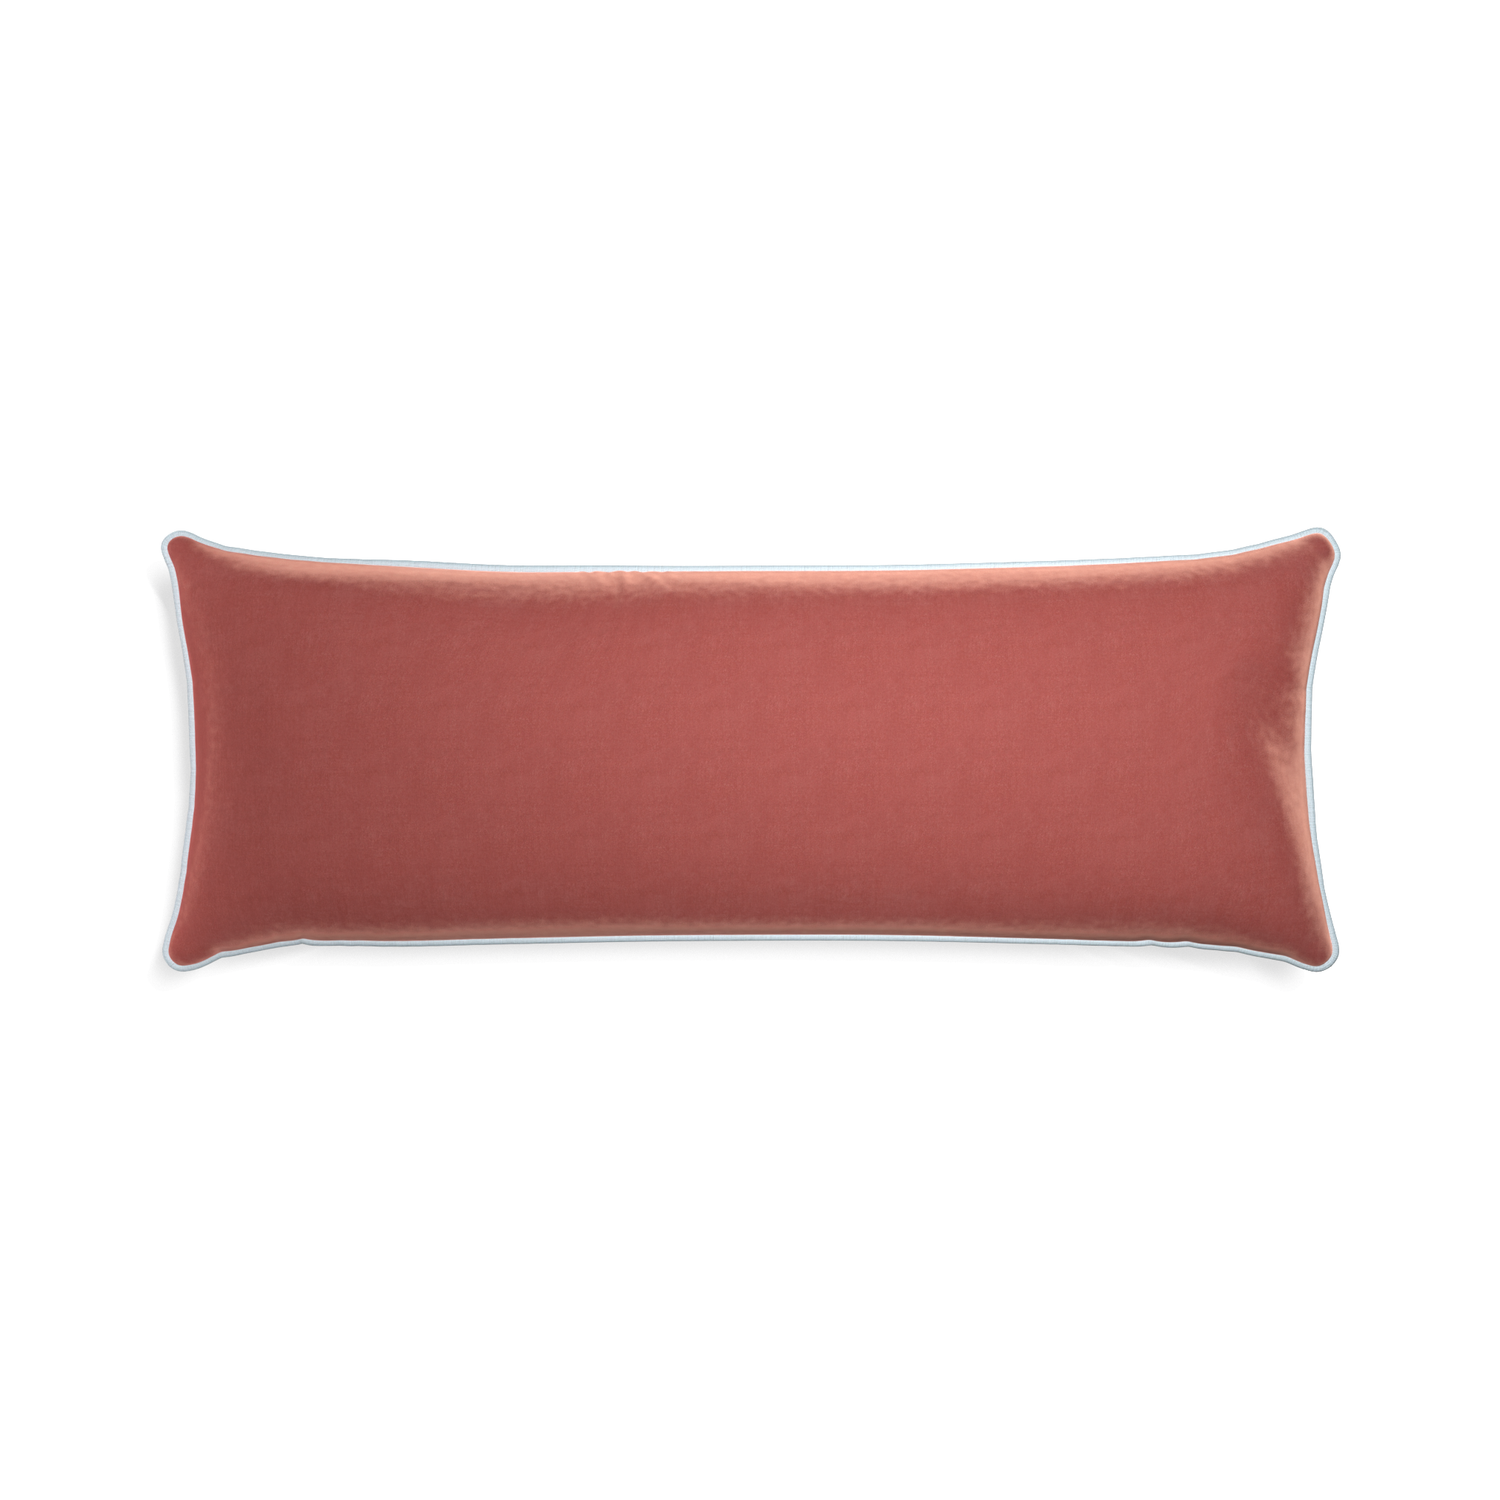 Xl-lumbar cosmo velvet custom pillow with powder piping on white background